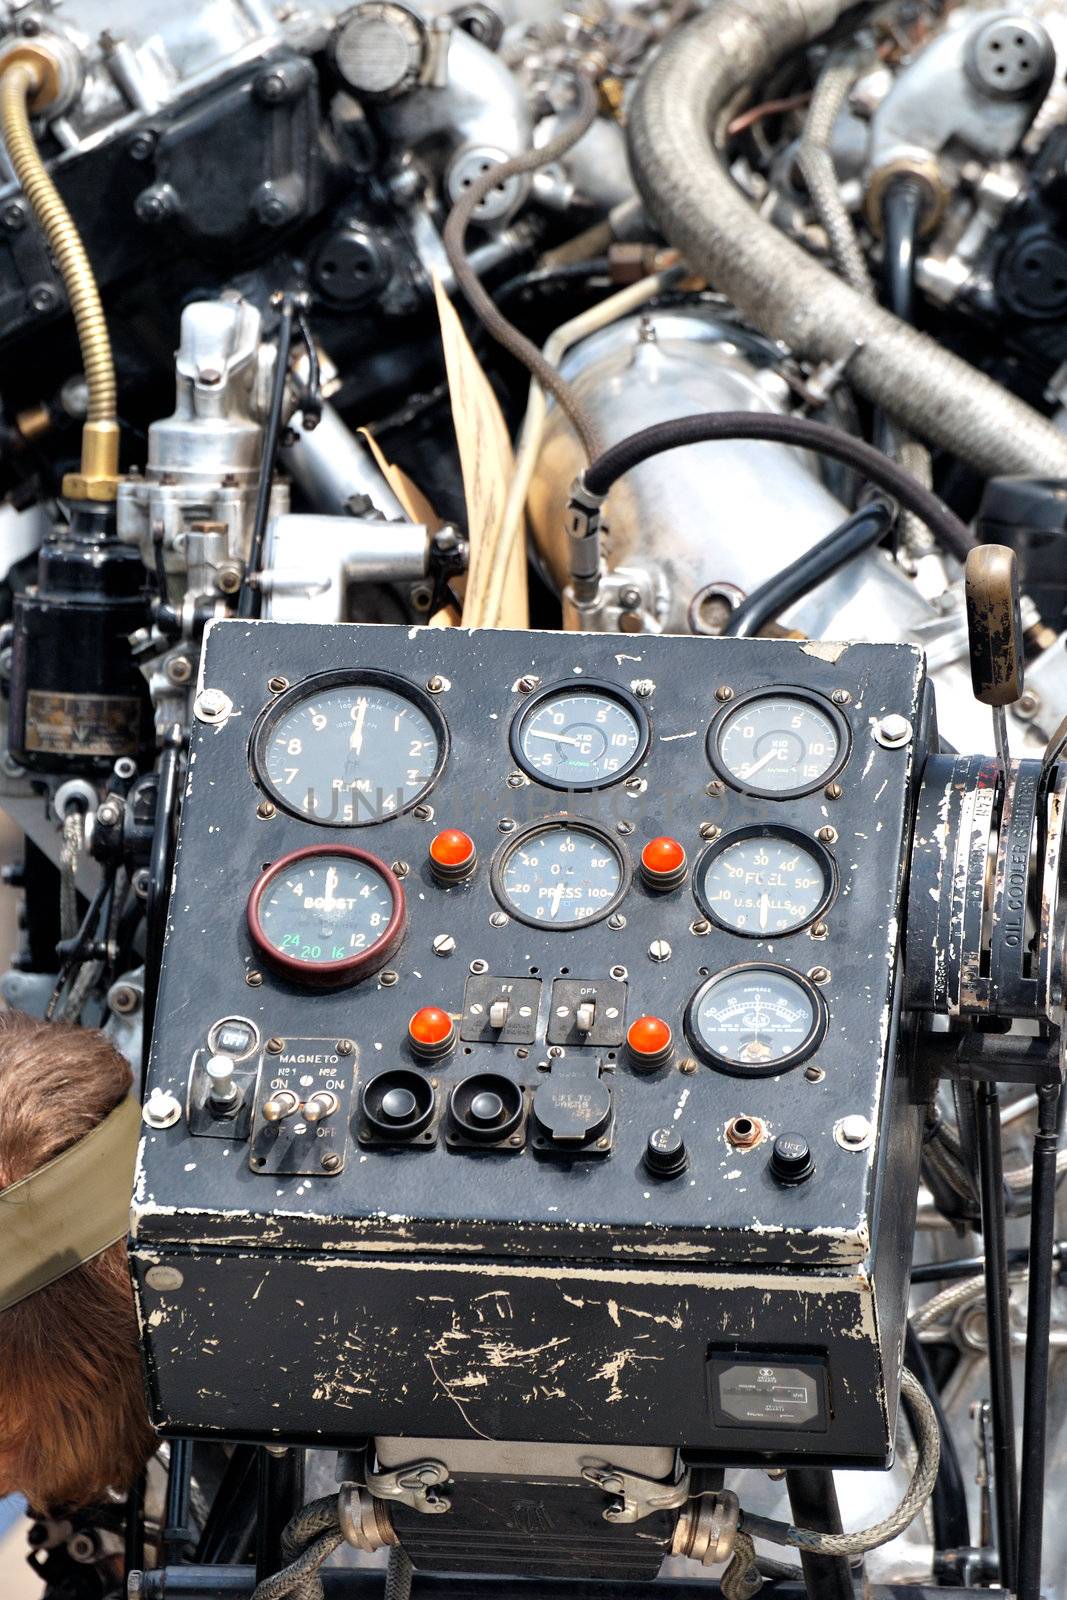 reetro engine with lots of dials